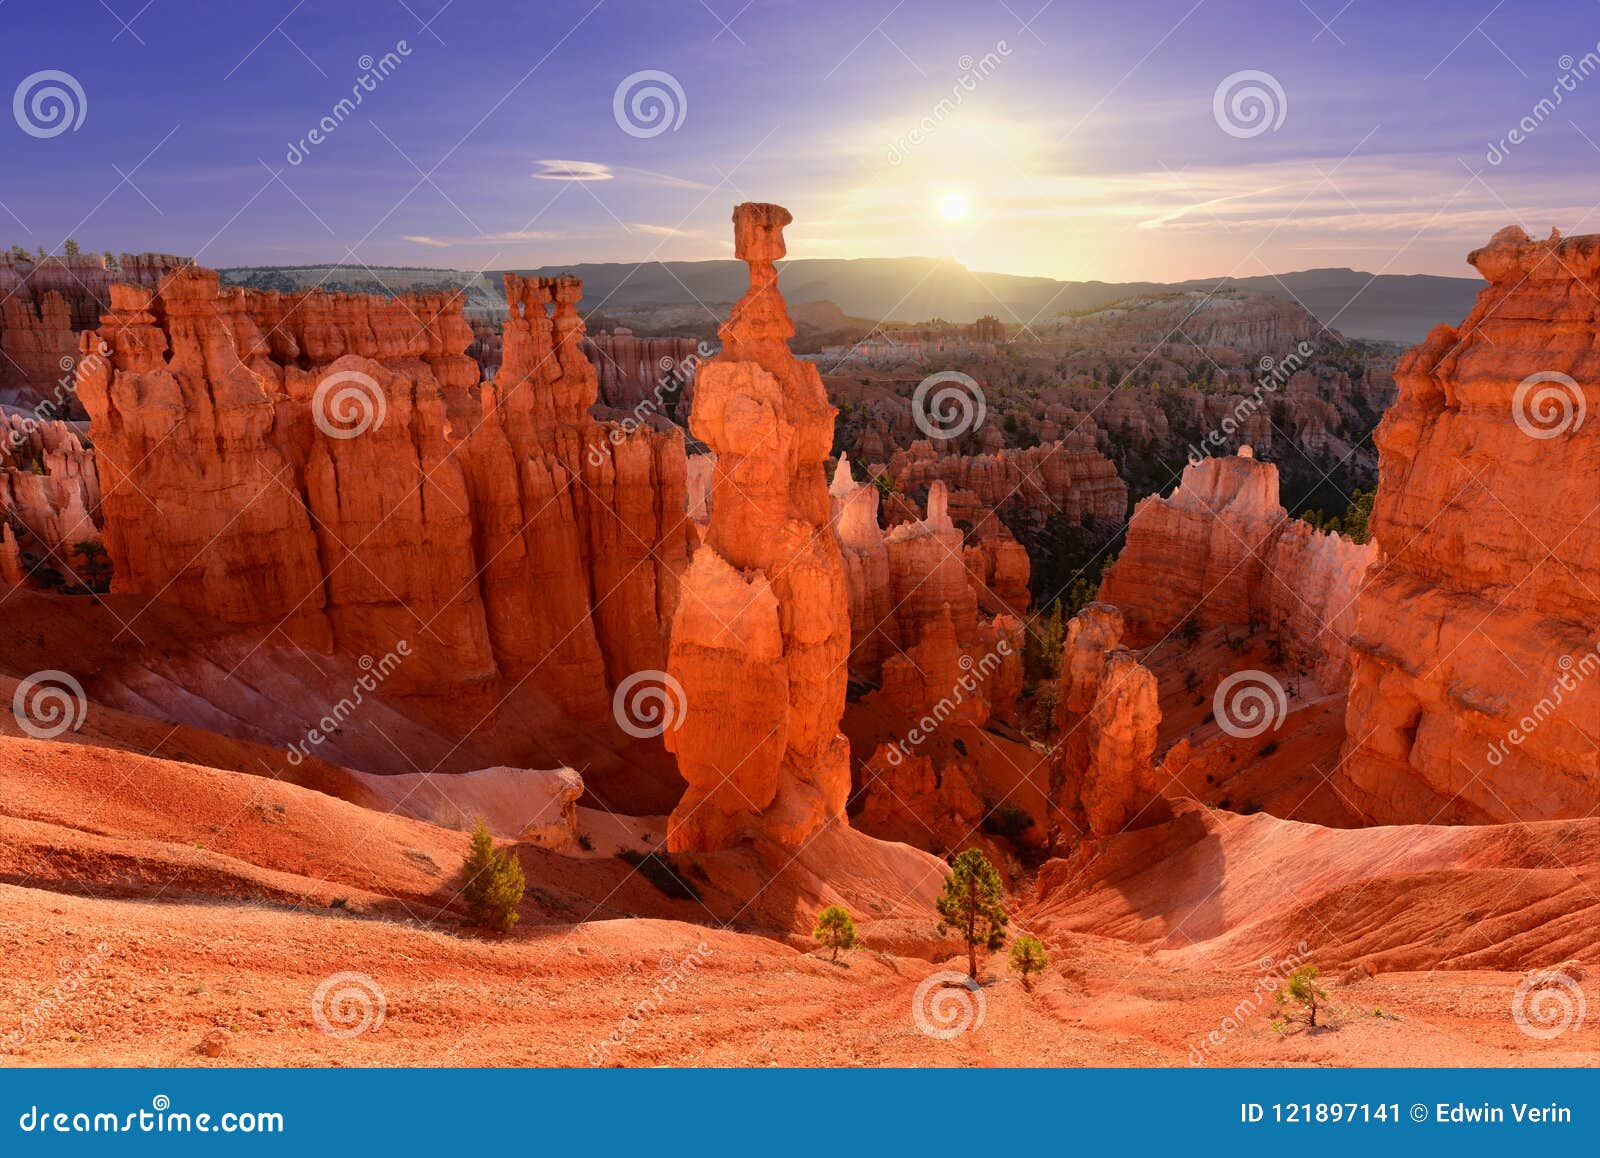 thor`s hammer in bryce canyon national park in utah, usa